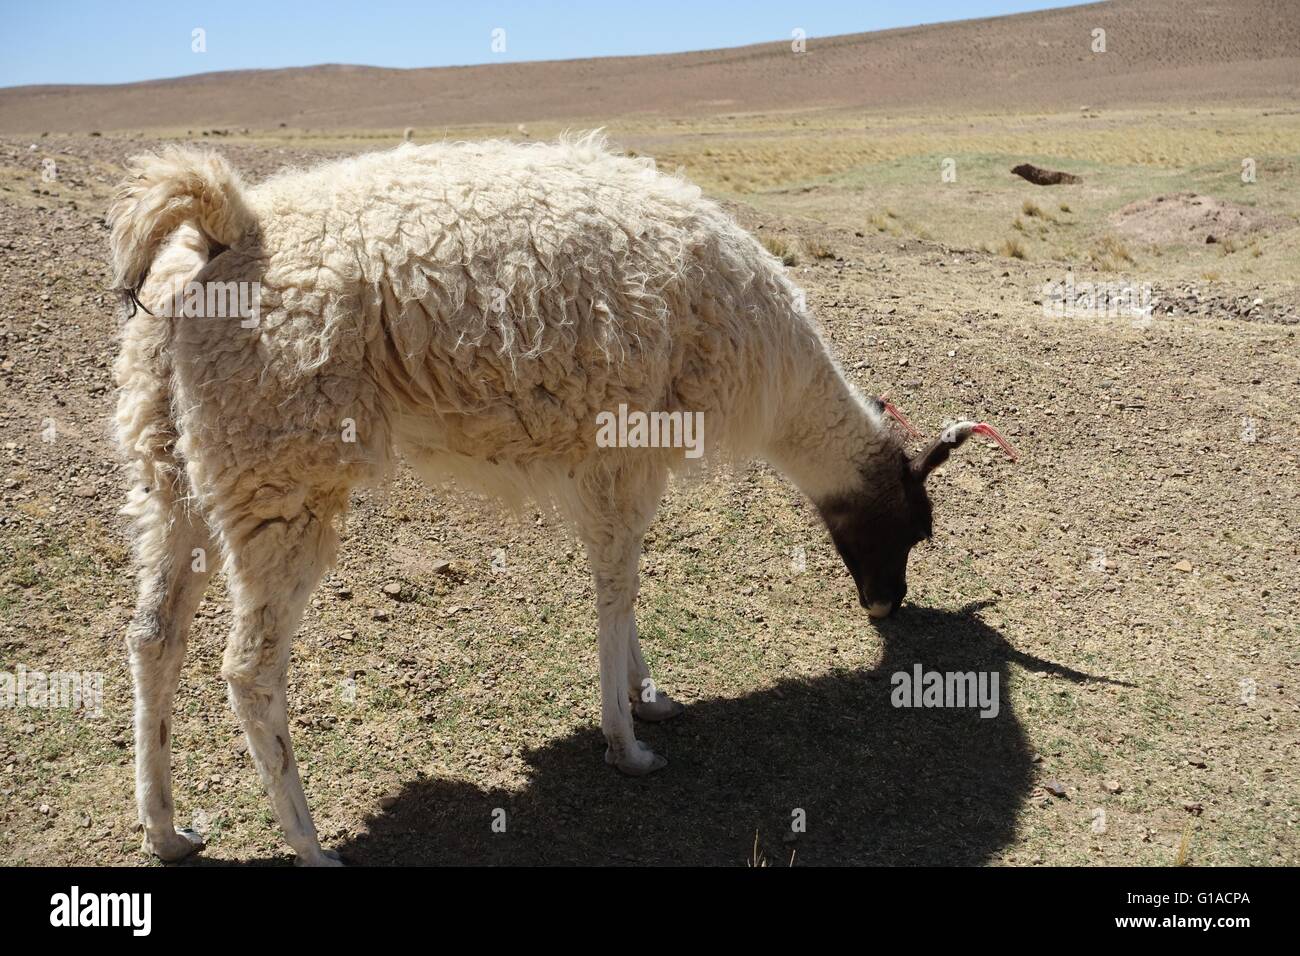 Llama grazing in the Andes, Peru Stock Photo